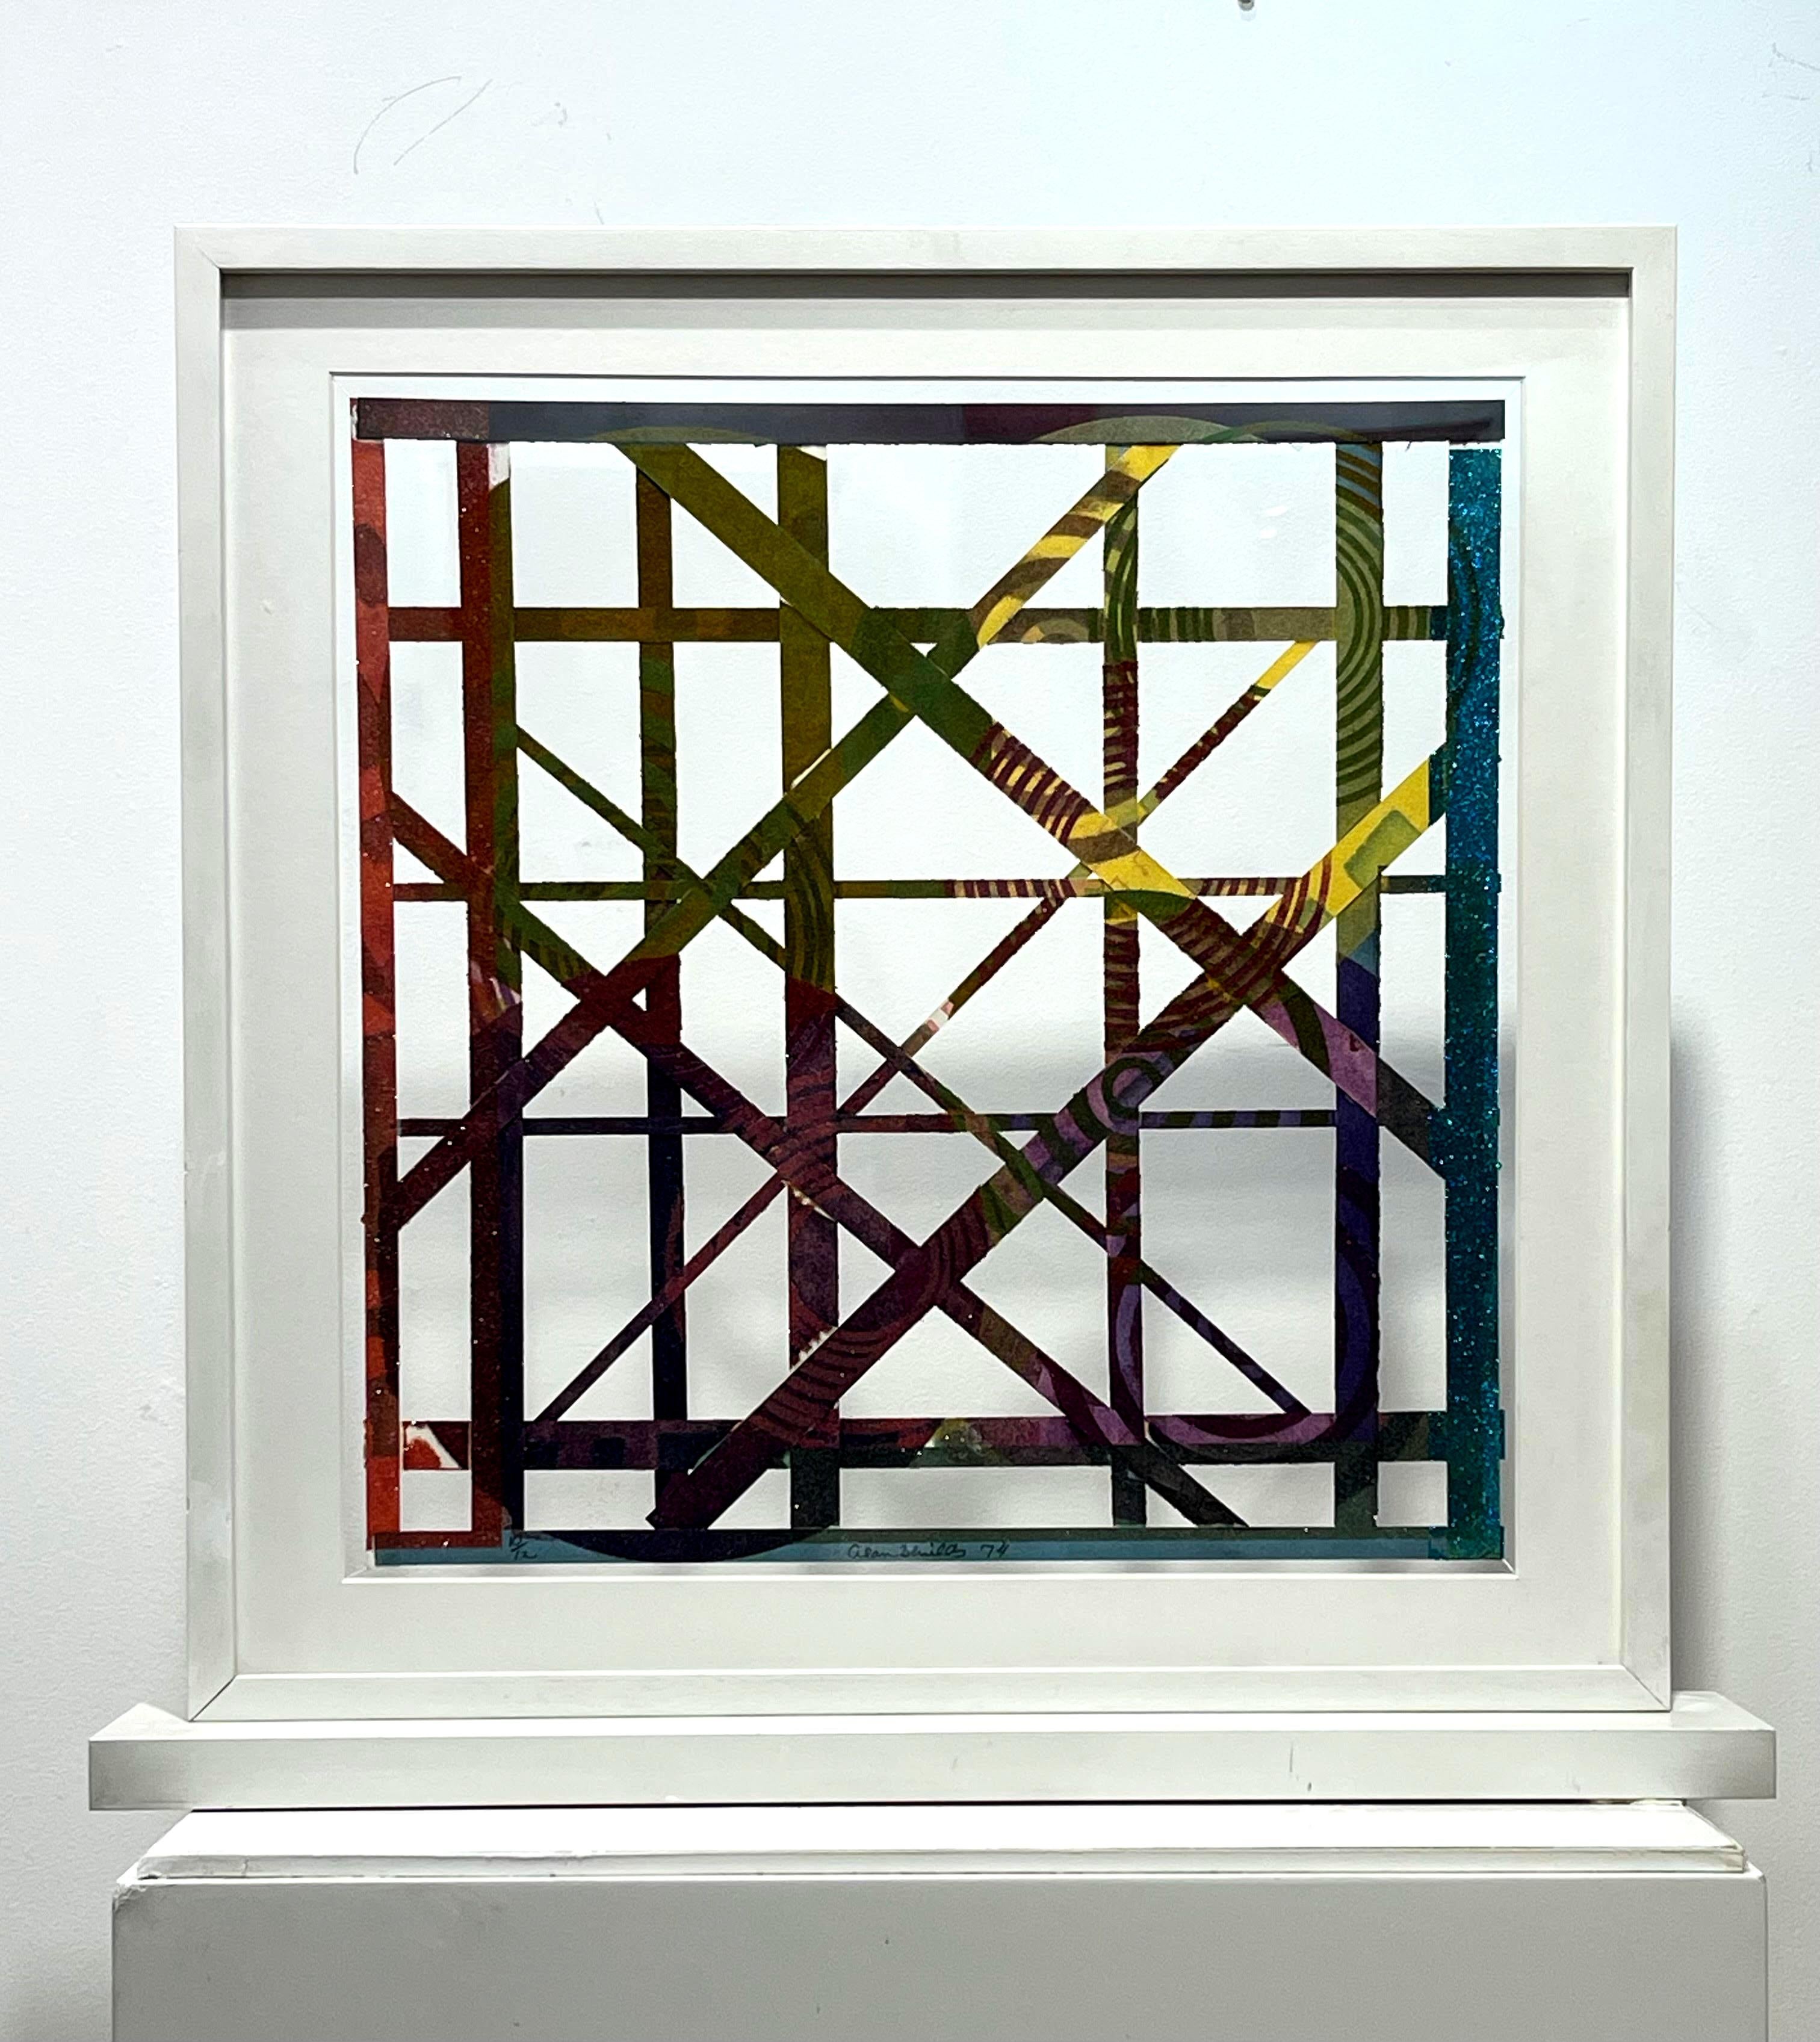 Alan Shields
Untitled double sided mixed media work, 1974
Mixed media: watercolor, string, and torn paper held in custom standing frame
Signed, dated, and numbered lower edge '10/12 Alan Shields 74'
Frame included

Signed, dated, and numbered lower